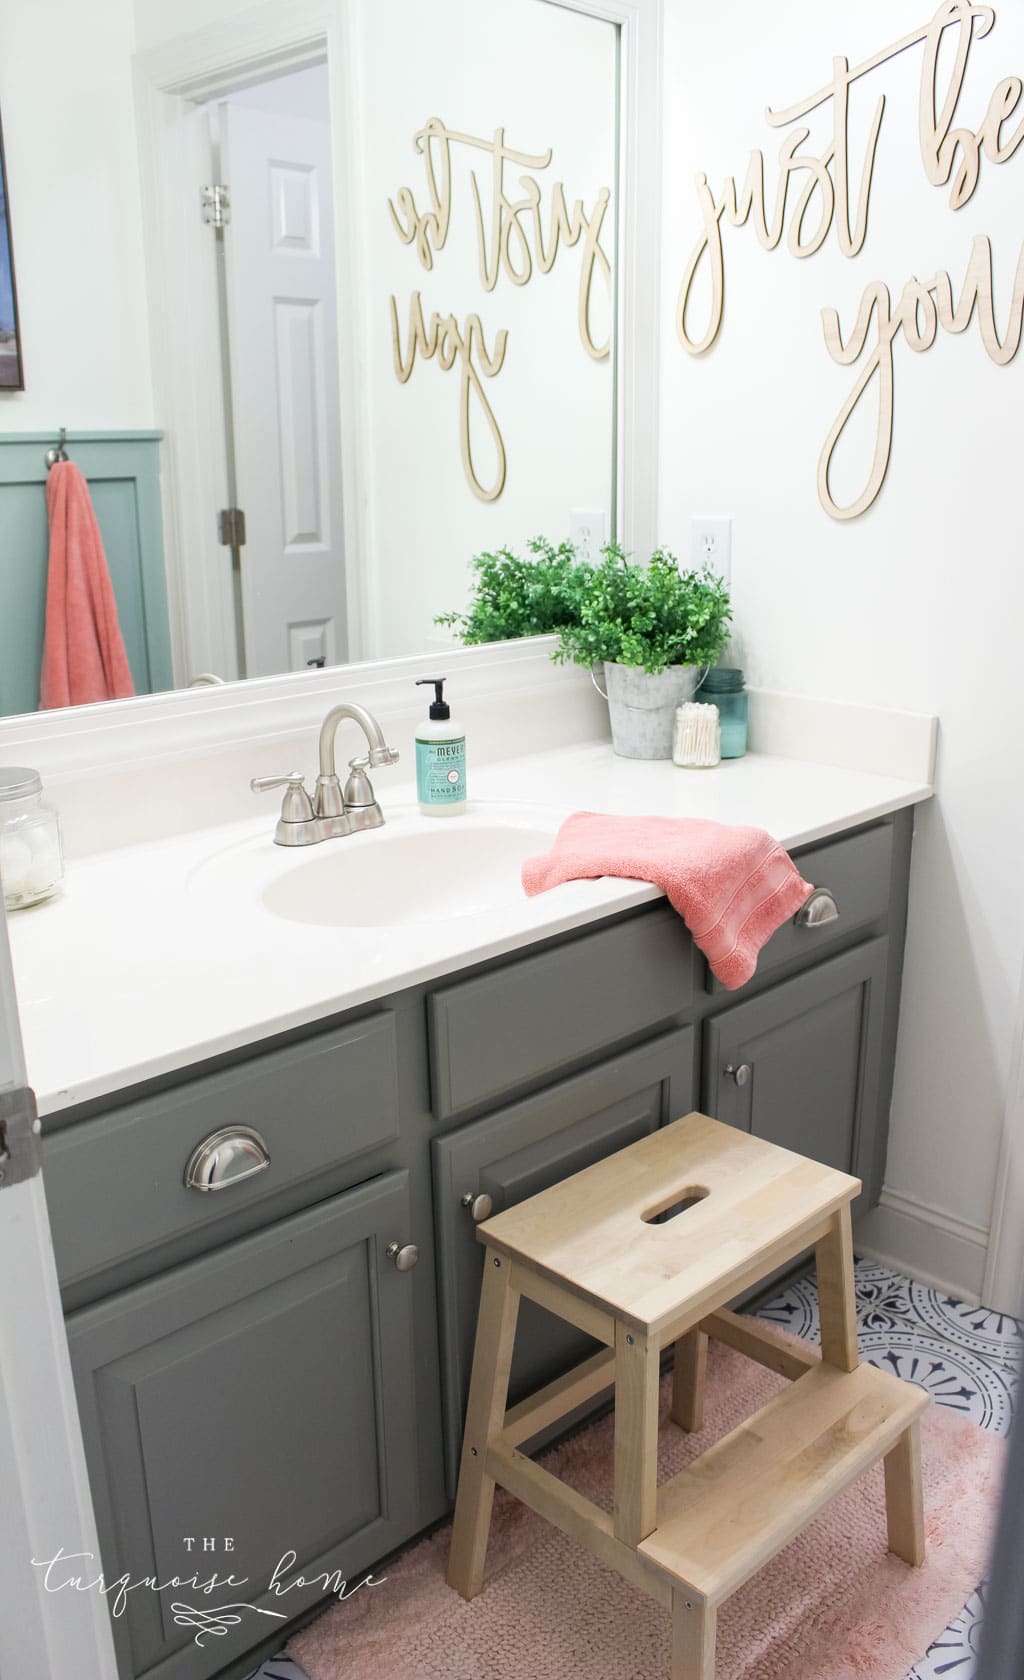 How to Create Big Style in a Small Bathroom